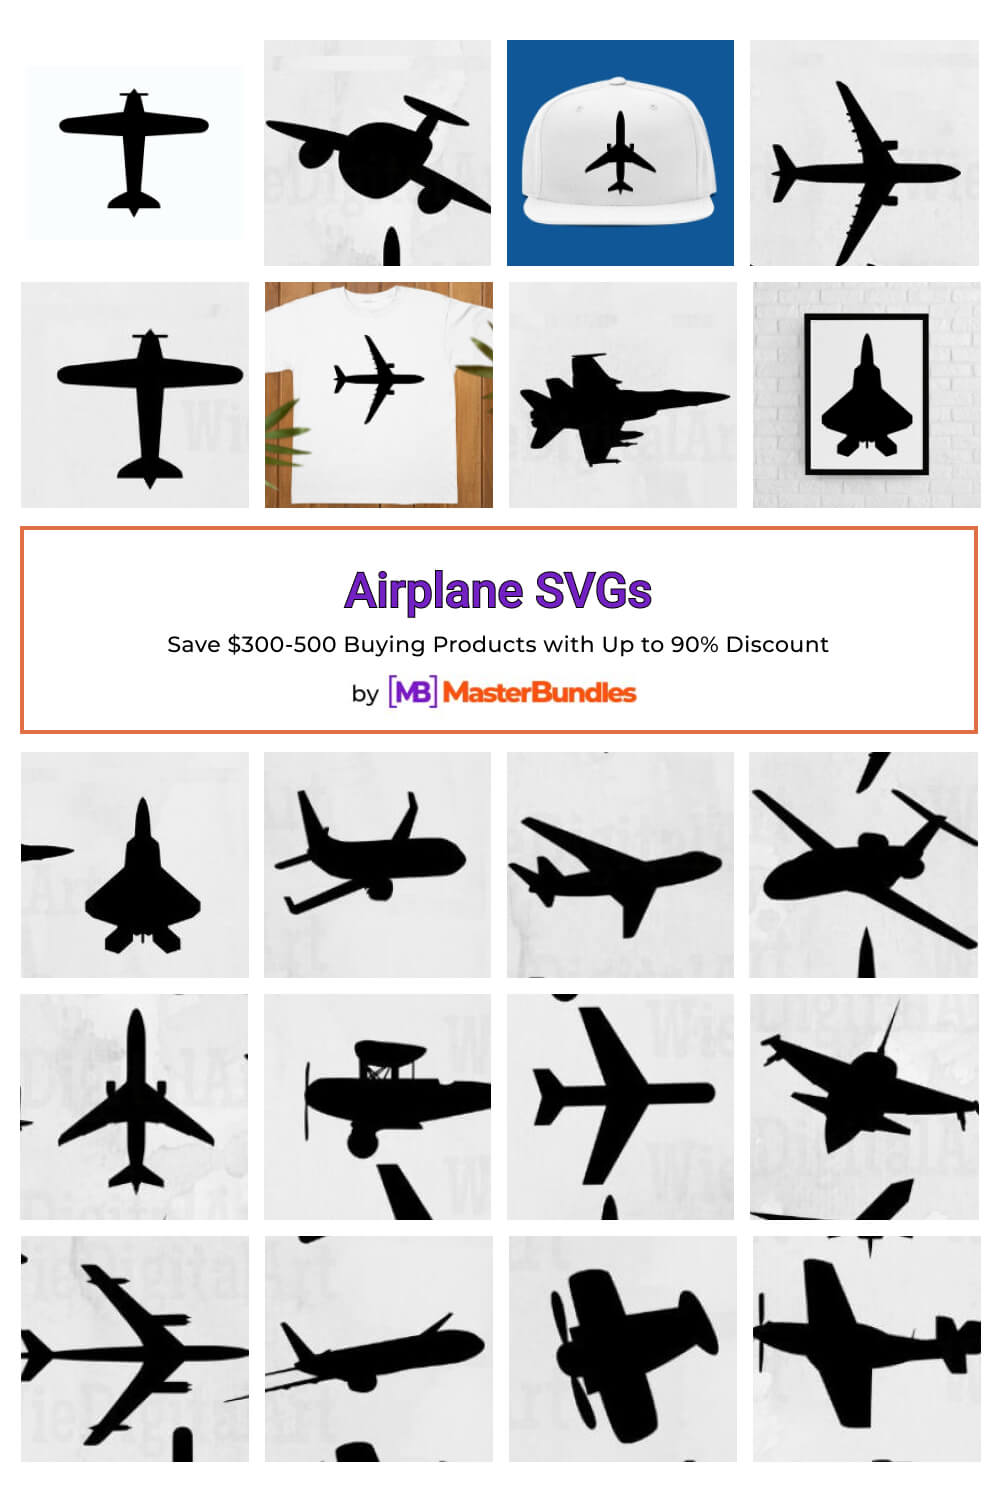 airplane svgs pinterest image.